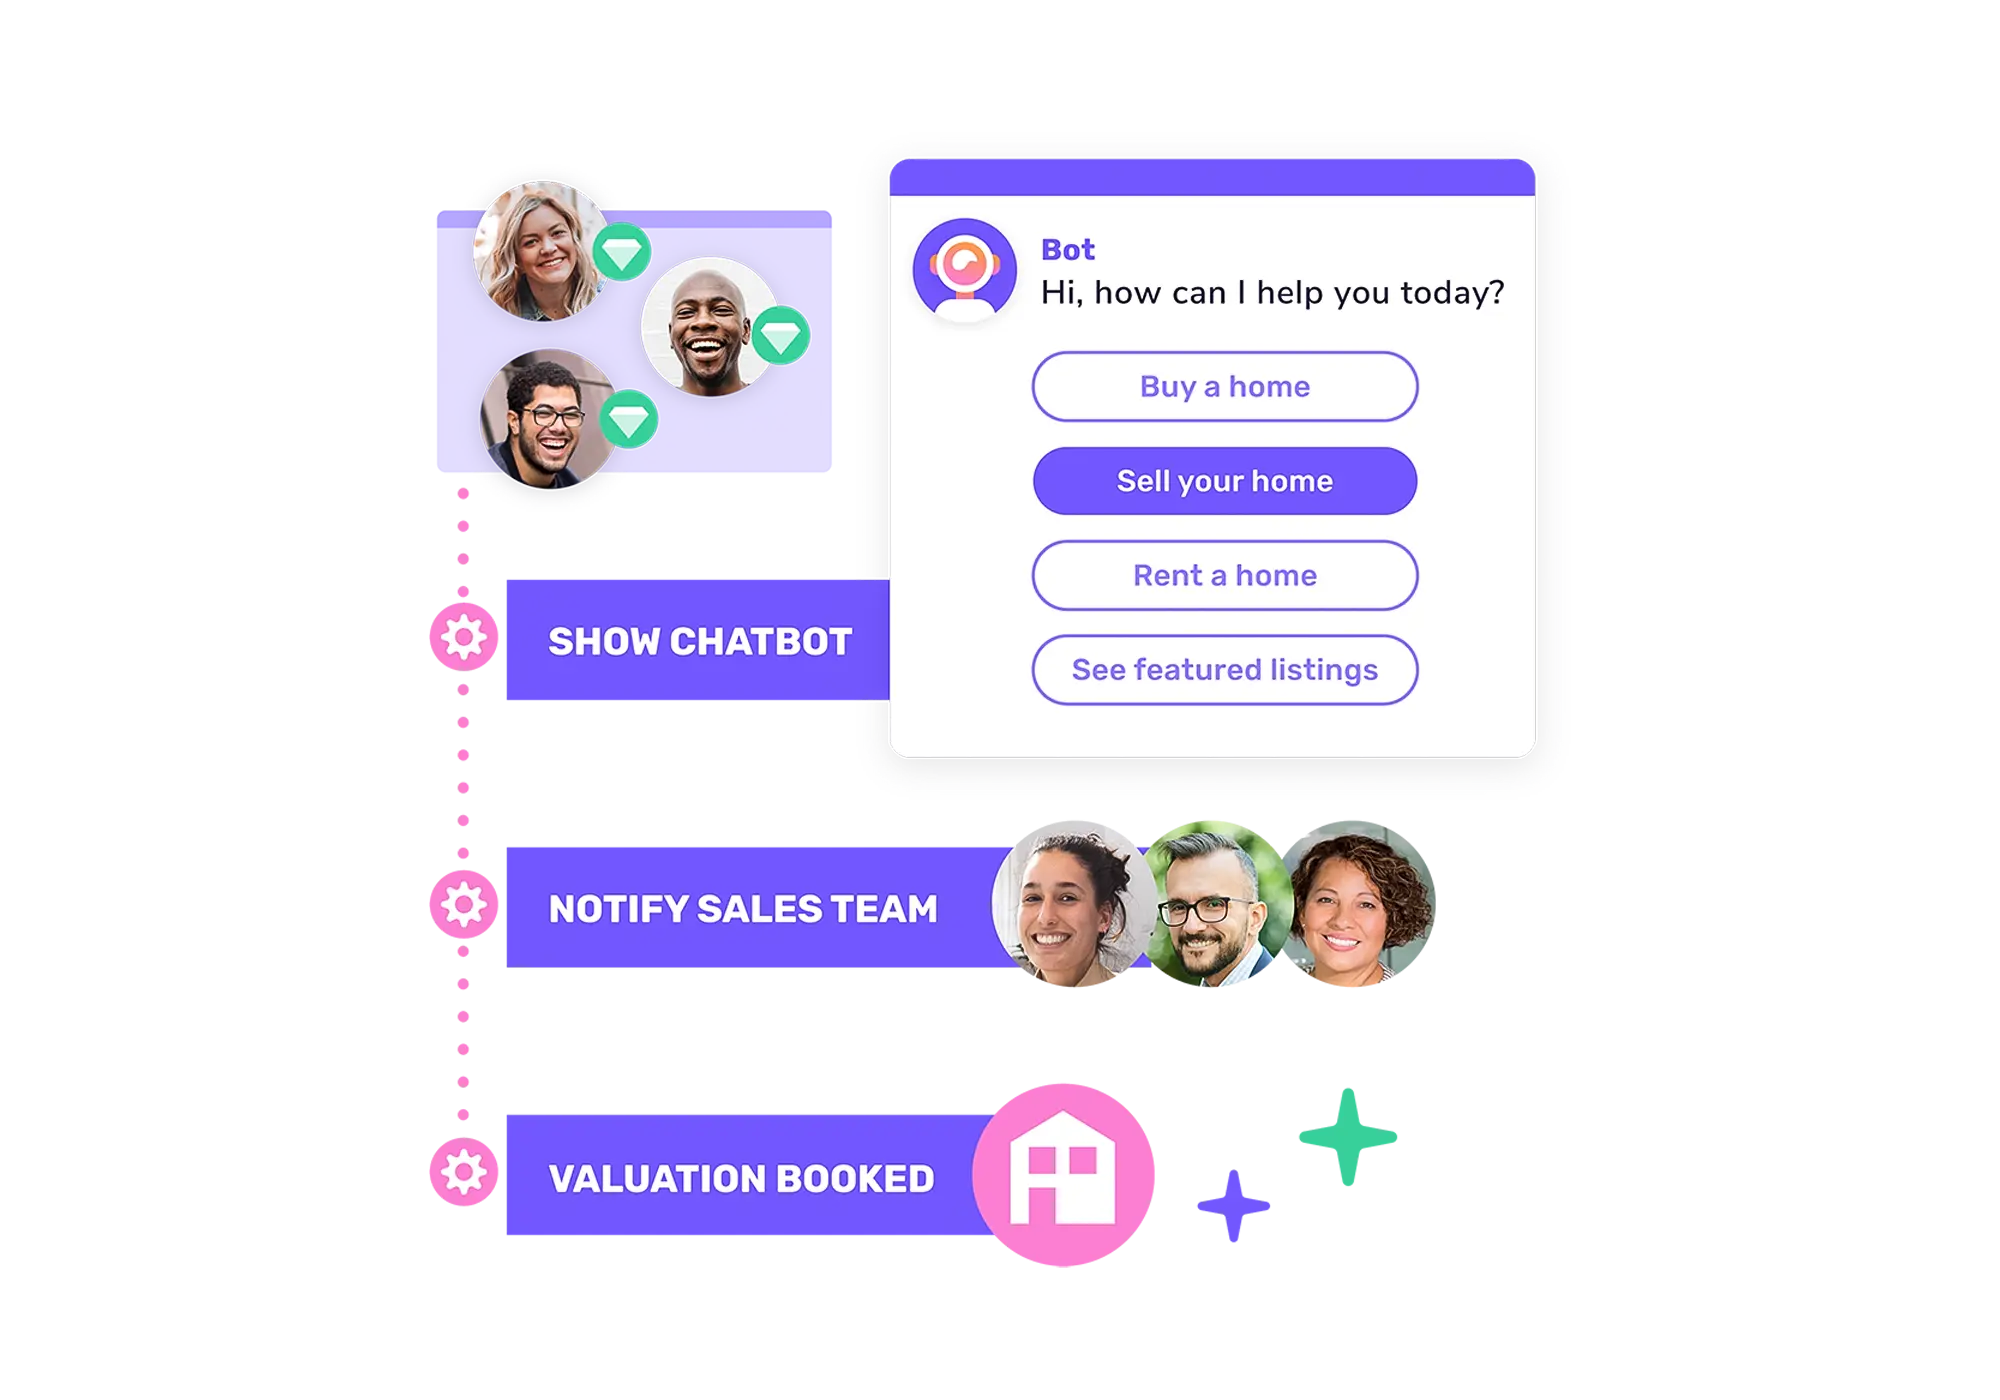 Lead follow up process from chatbot to valuation booking